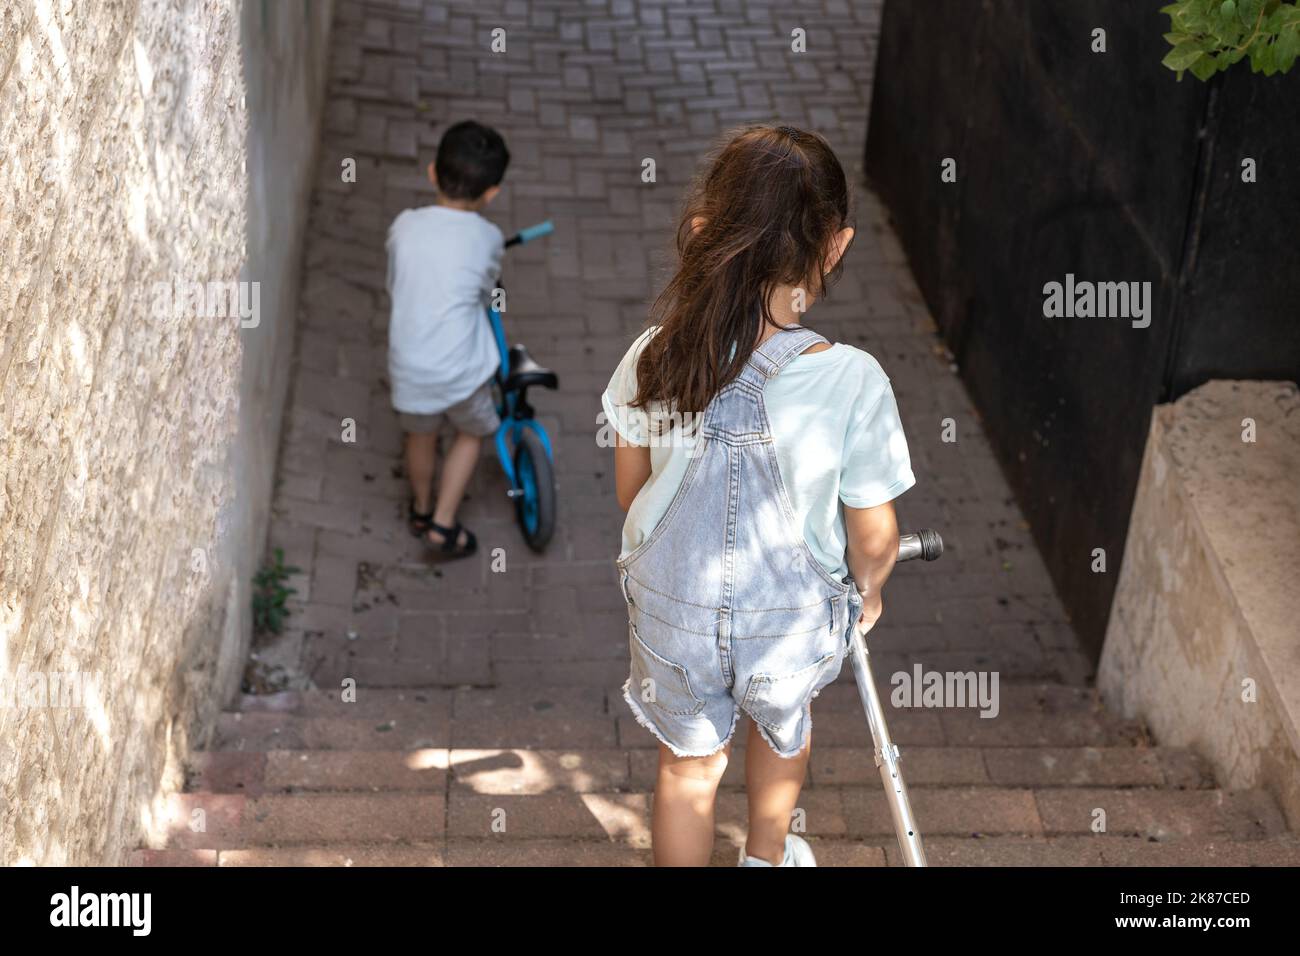 Boy with bicycle and his sister with scooter moving down on staircase in the city. Stock Photo